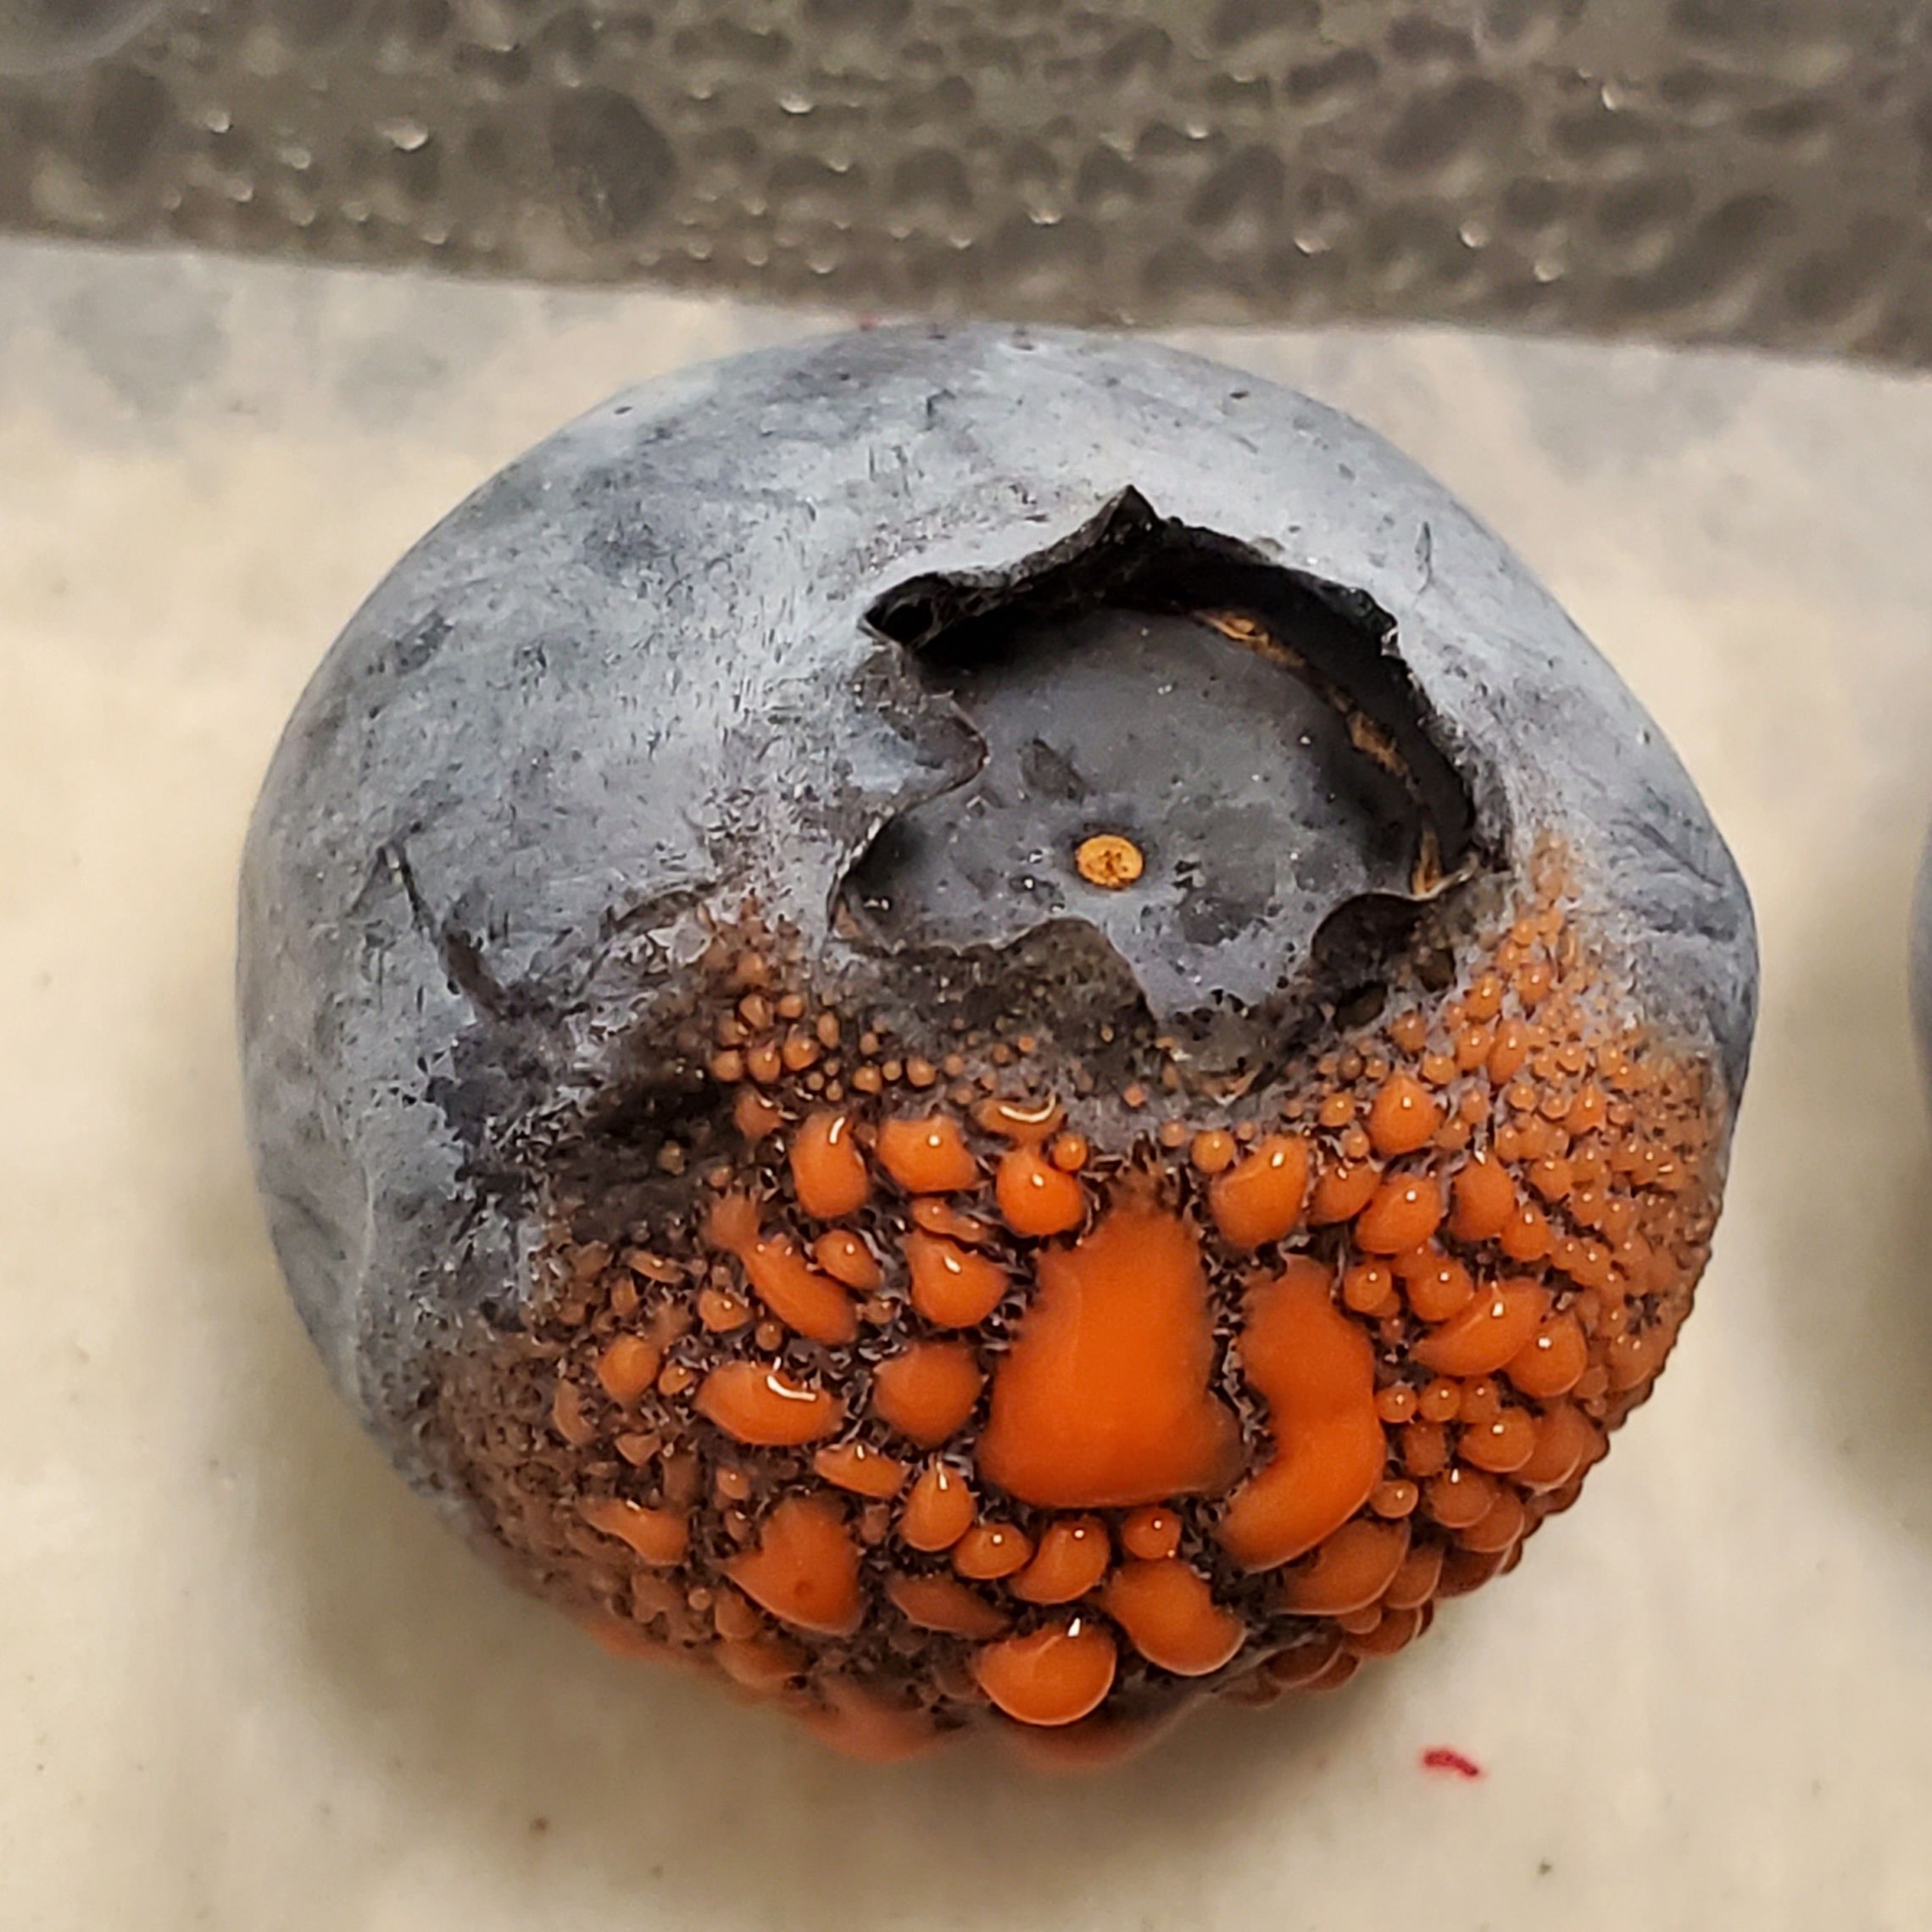 Typical symptoms of blueberry anthracnose fruit rot (AFR) on fruit under wet conditions. Note the bright orange mass of spores.